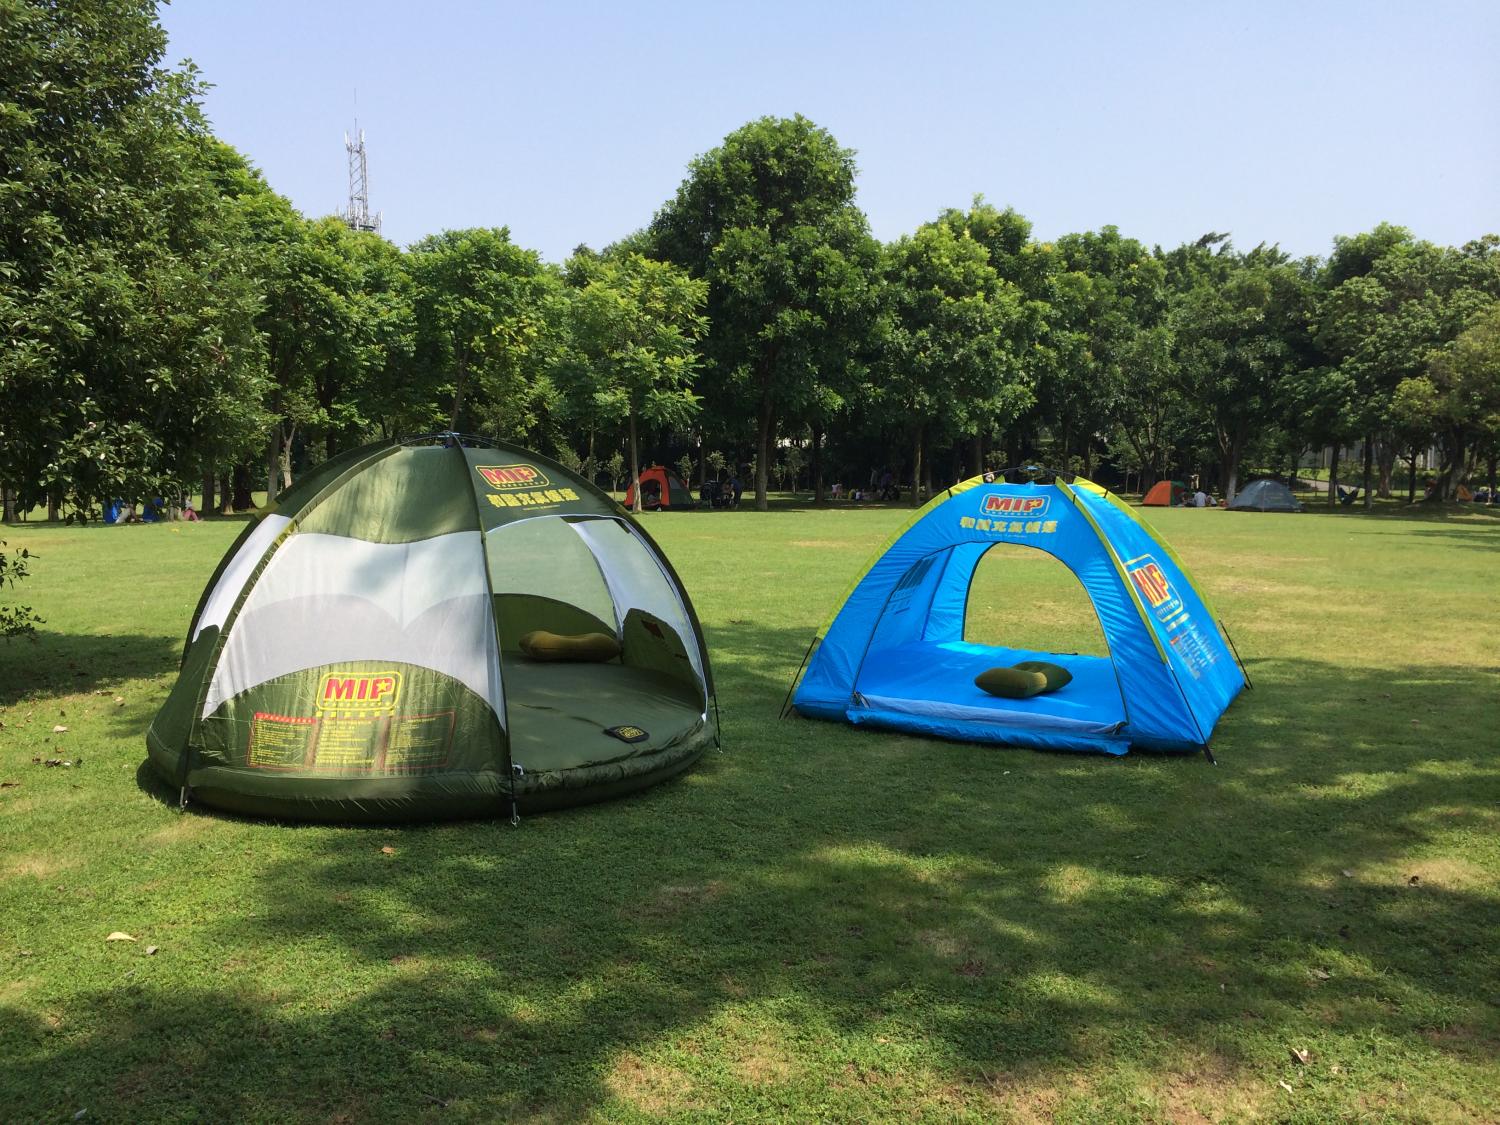 Inflatable Floating Tent - Floating water tent for the lake